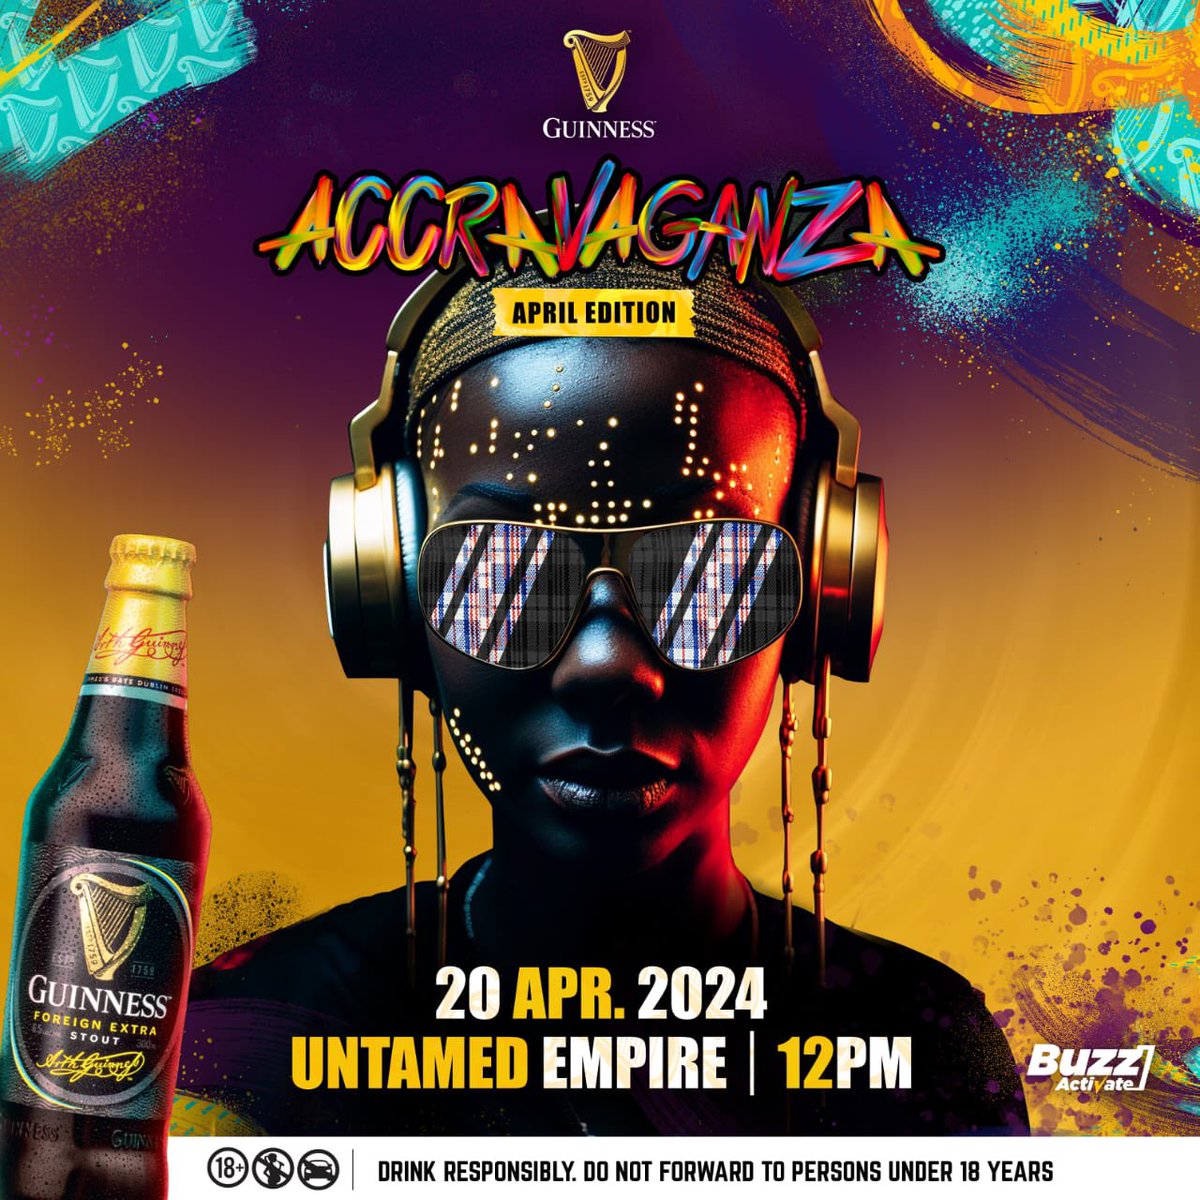 Easy and convenient! Grab your Guinness Accravaganza tickets at accravaganza.com and get ready to party!
What are you waiting for 😍

#GuinnessAccravaganza